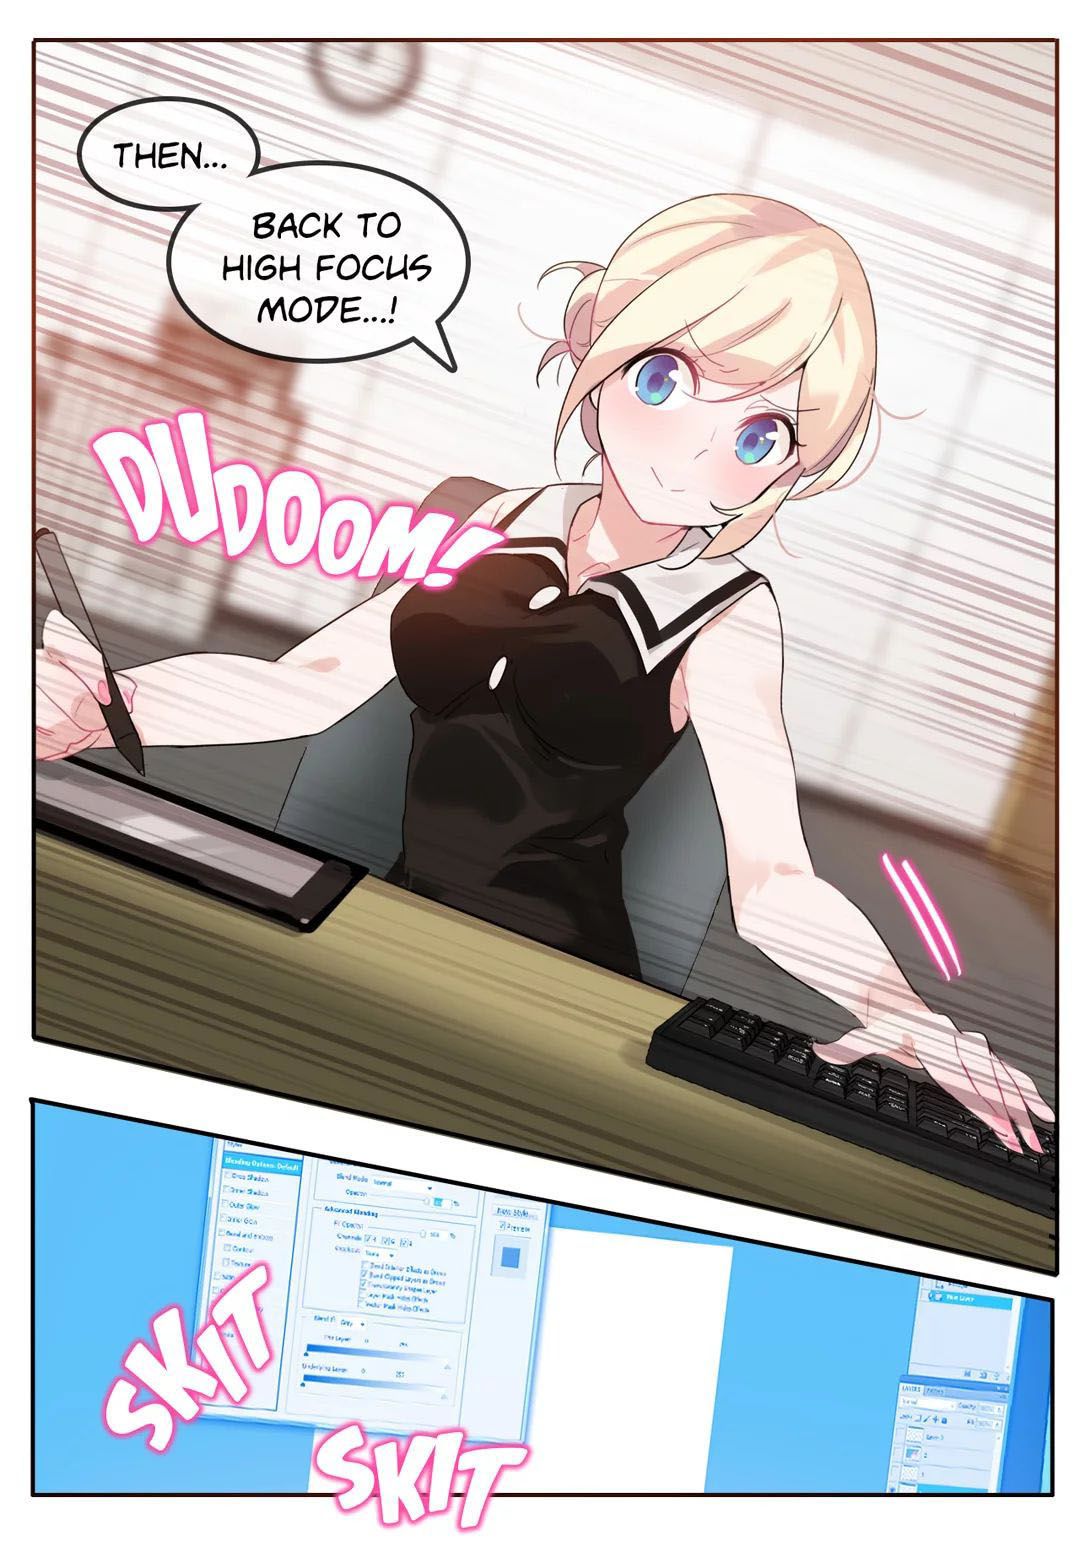 [Alice Crazy] A Pervert's Daily Life • Chapter 13: Roller Coaster (English) [Netorare World] 40